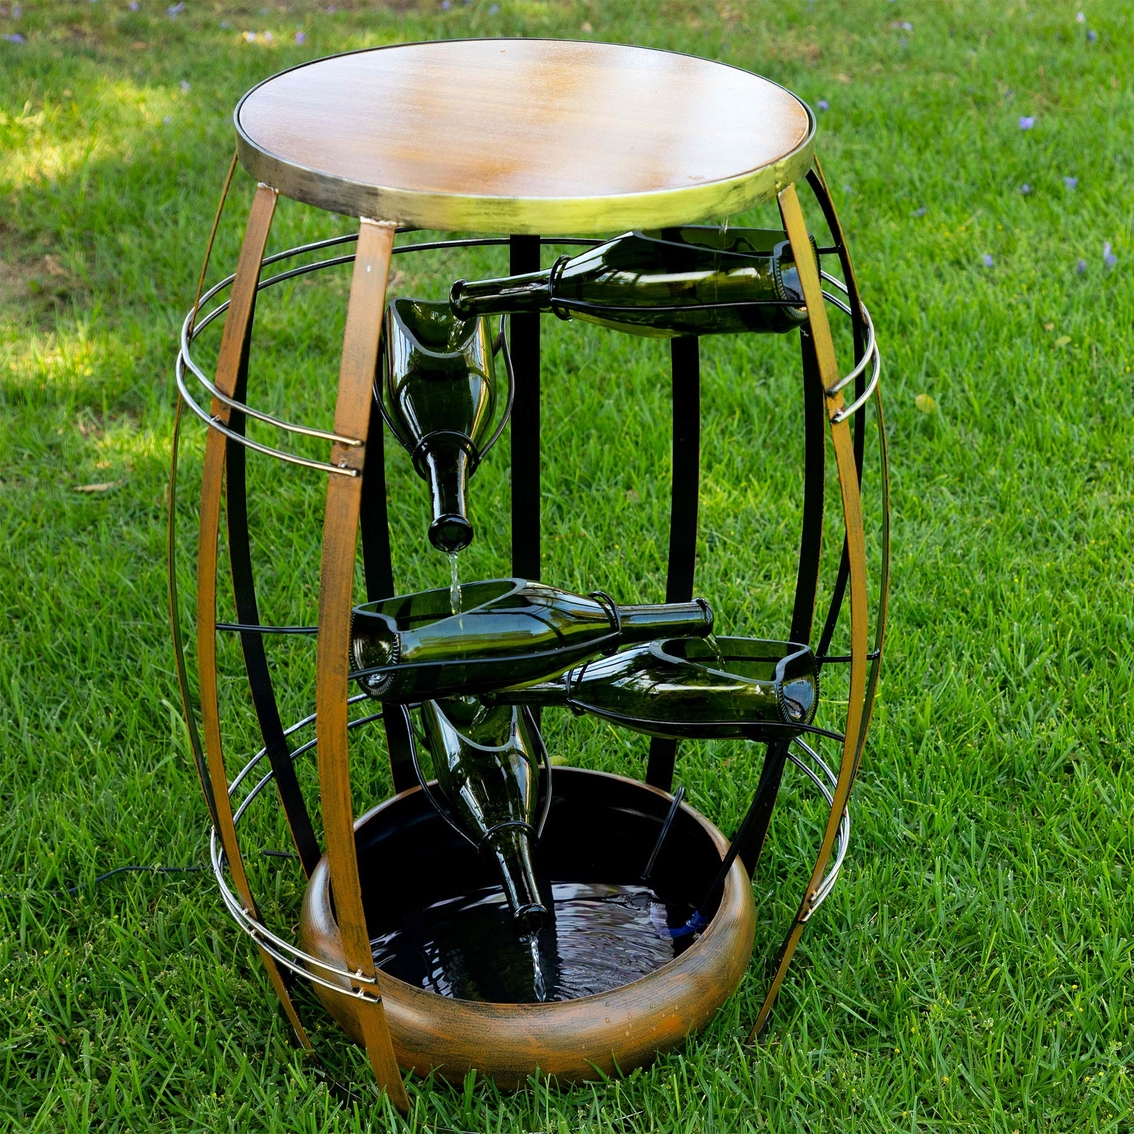 Alpine Metal Fountain with Tiered Glass Bottles - Image 3 of 6